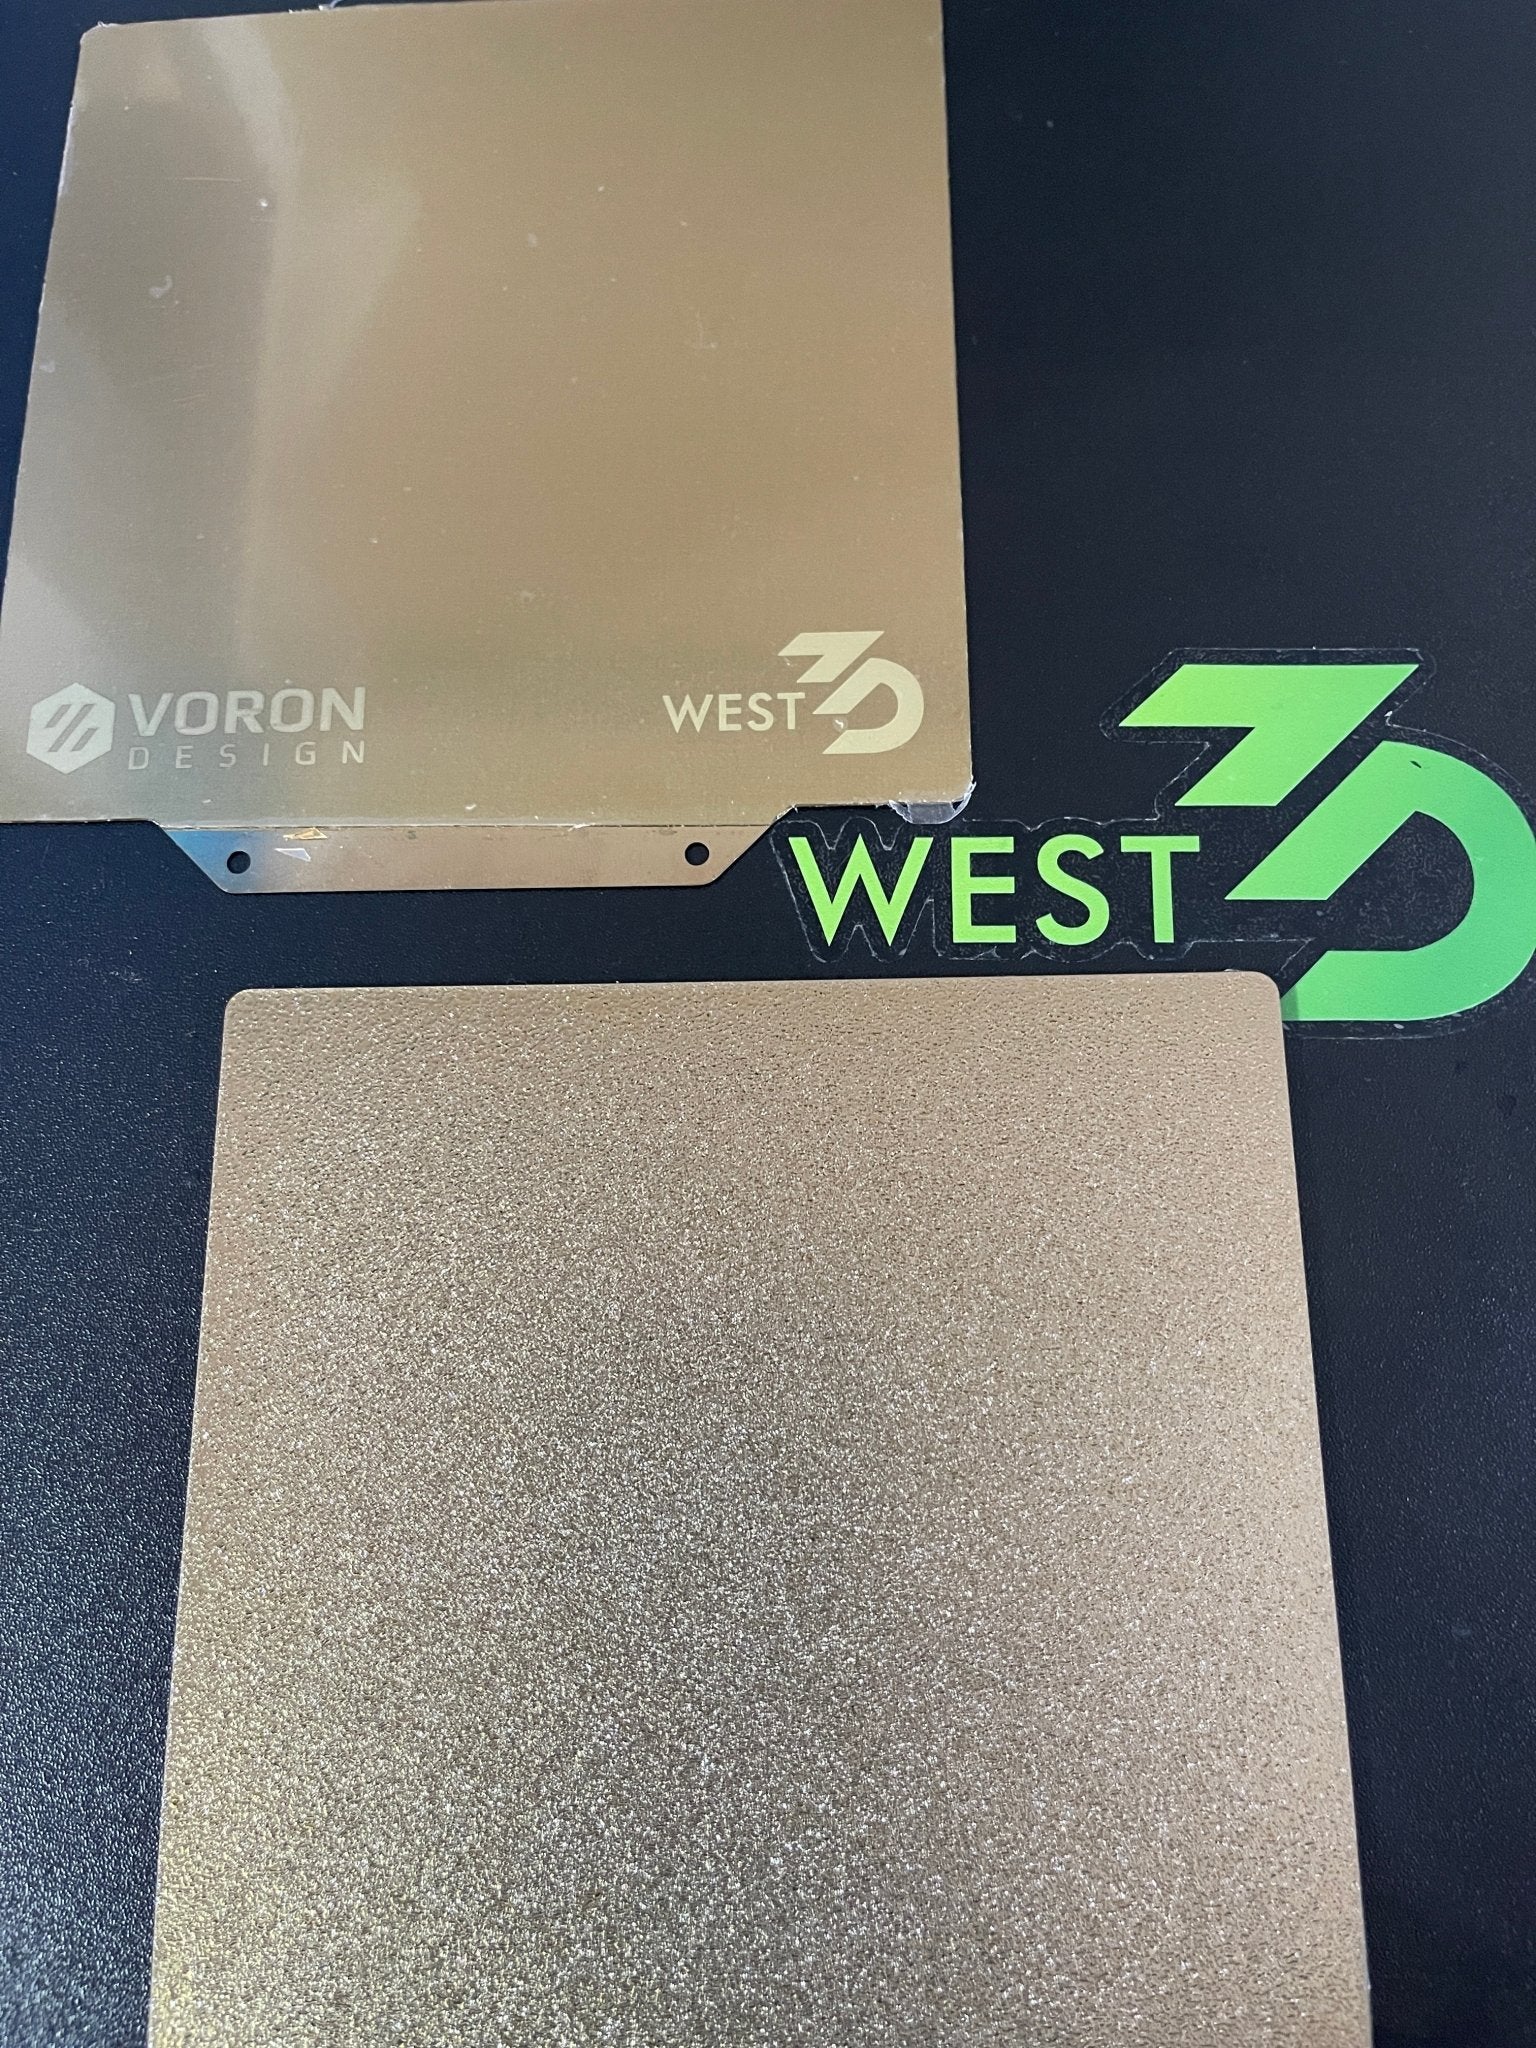 Magnetic Flex Plate Double-Sided and Single-Sided with 3M Magnetic Backing (Energetic & West3D Collab) - West3D Printing - Energetic